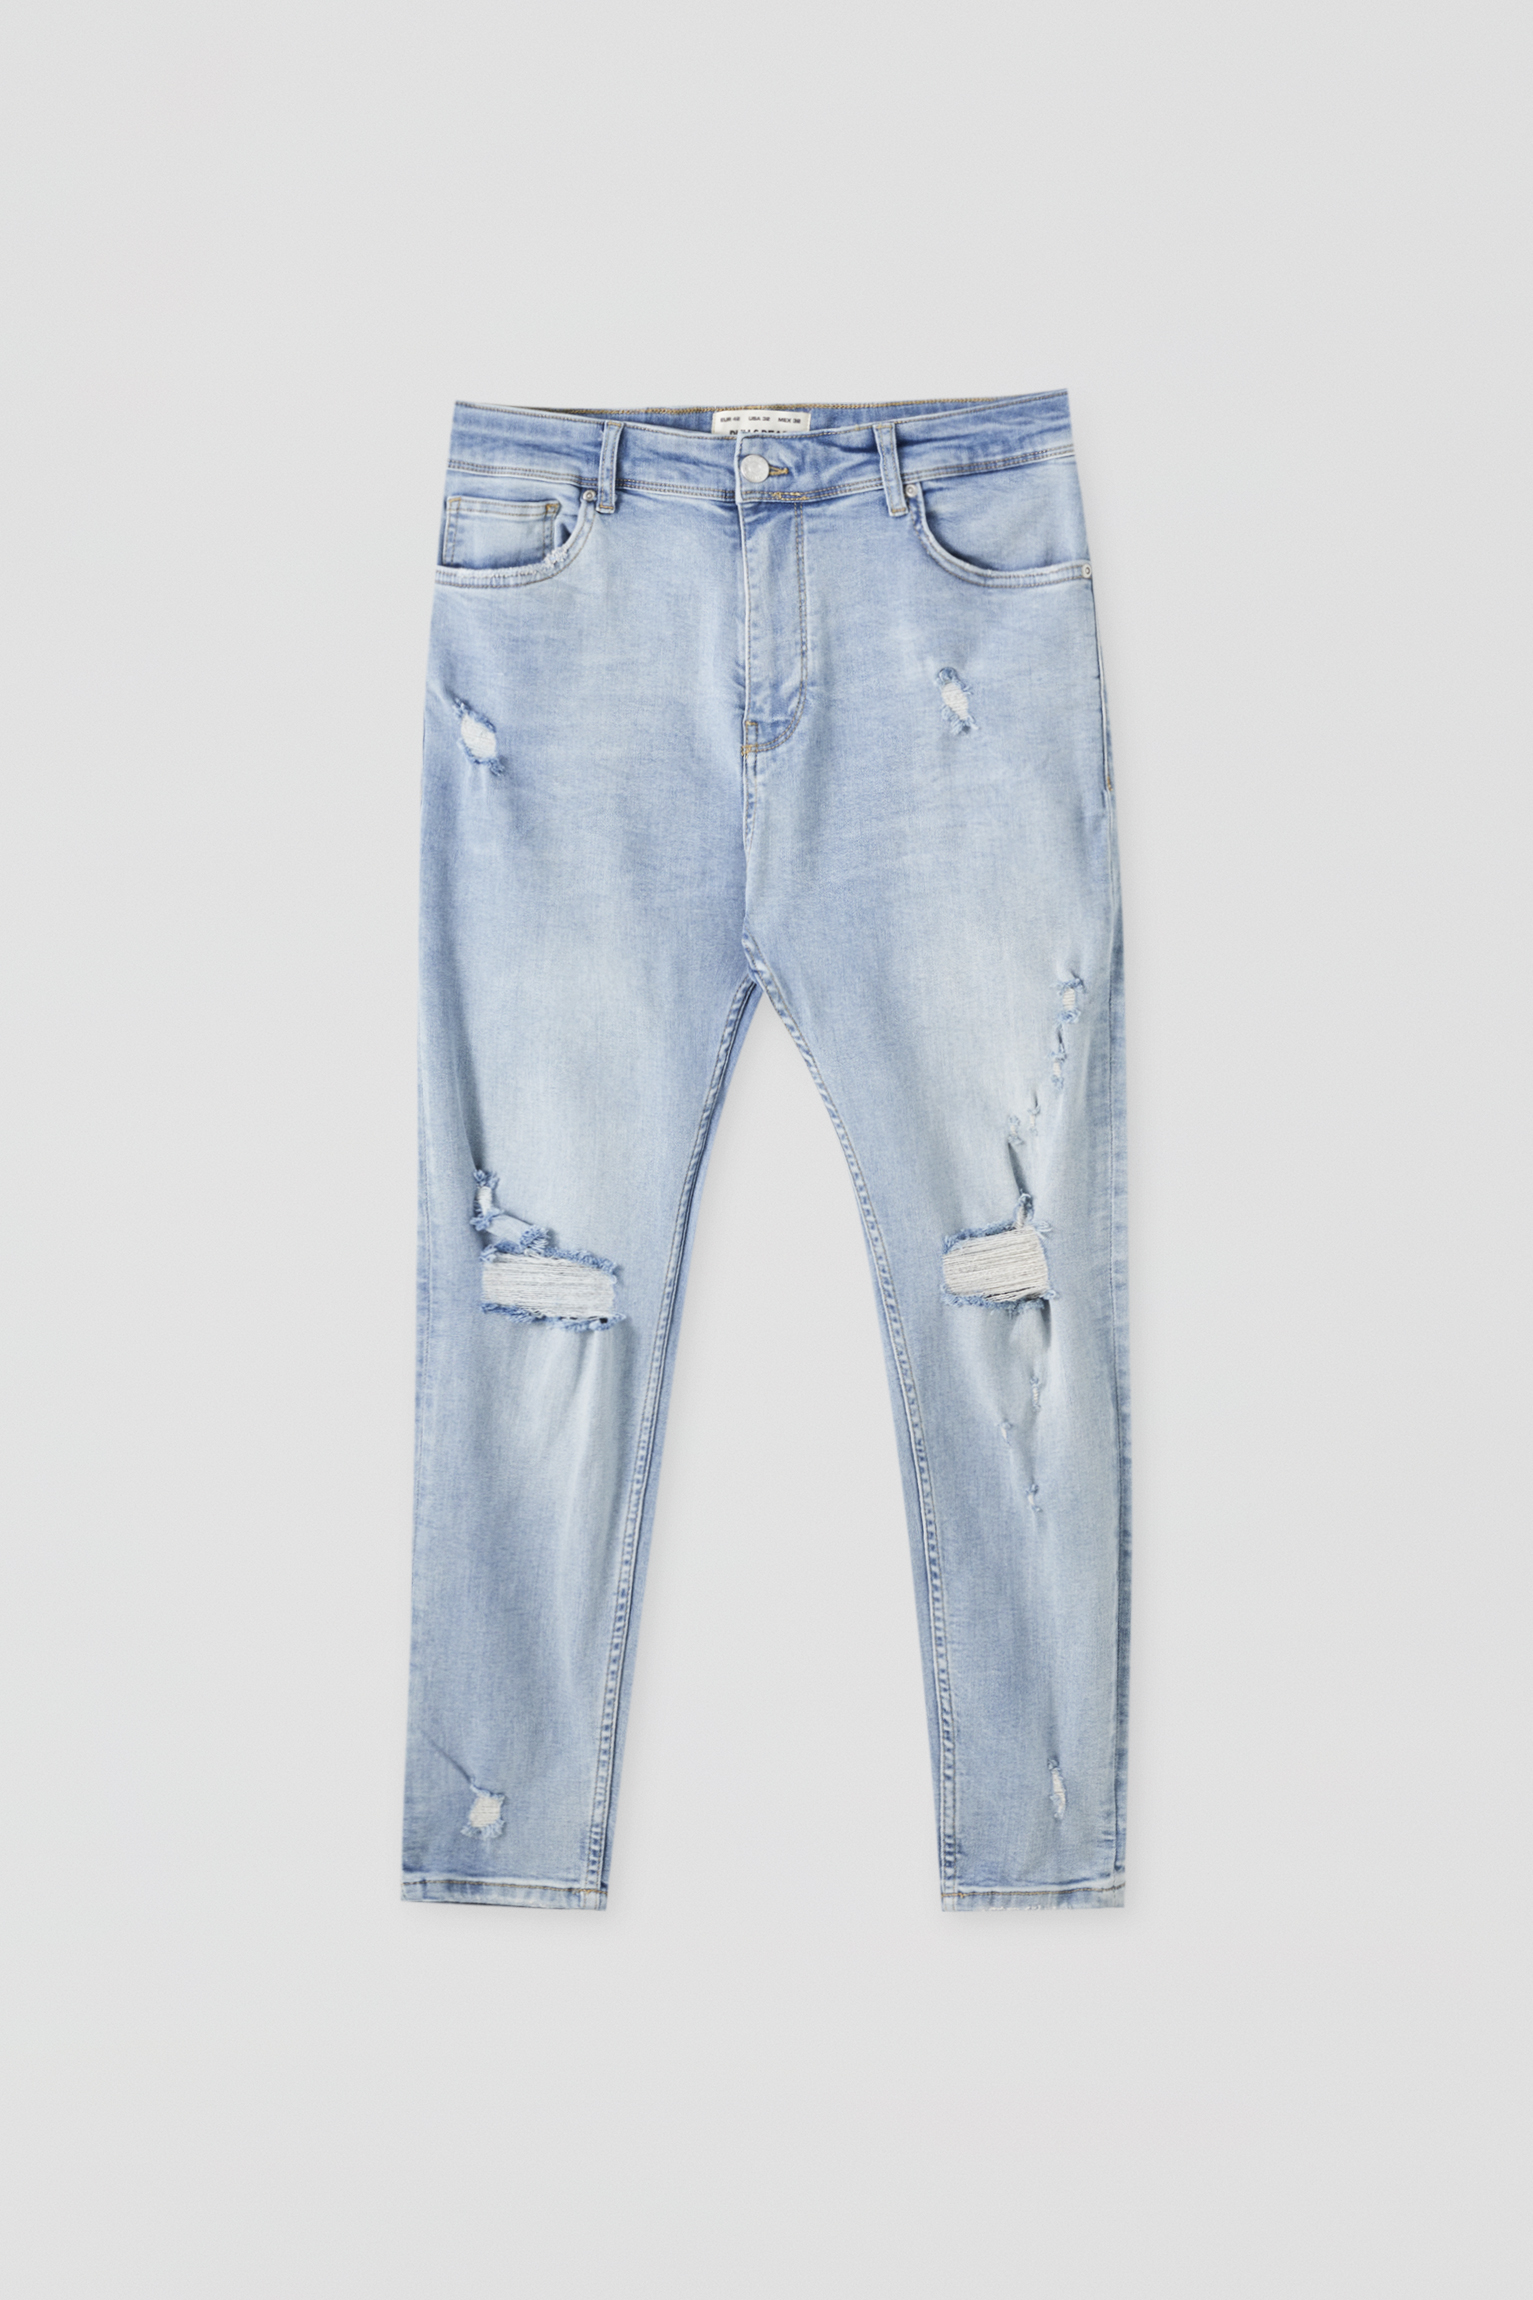 carrot style jeans